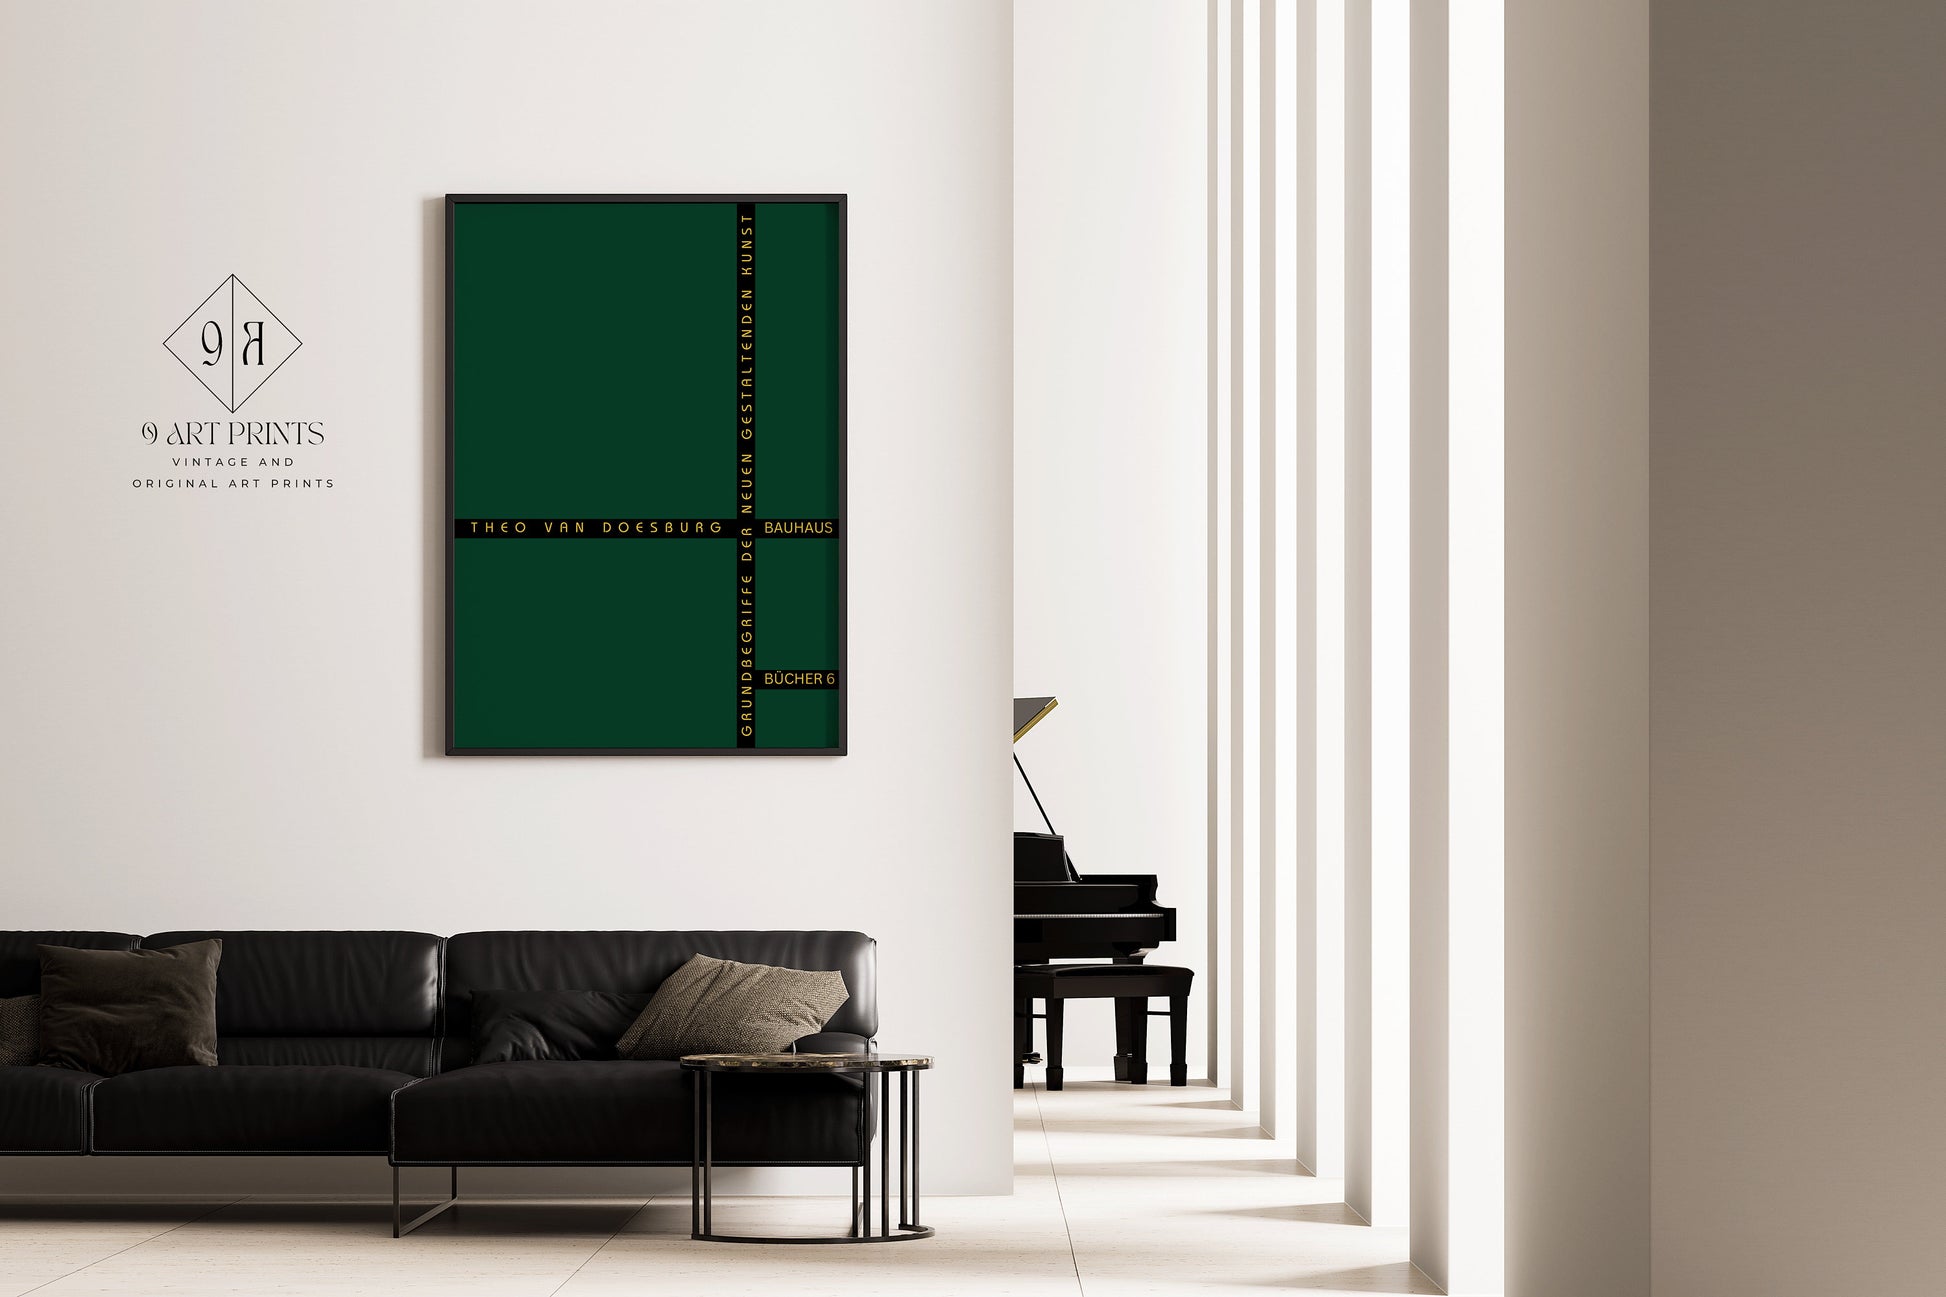 Bauhaus Forest Green Gold Poster Mid-Century Modern Print 60s Vintage Bucher Framed Abstract Museum Art Ready to hang Home Office Decor